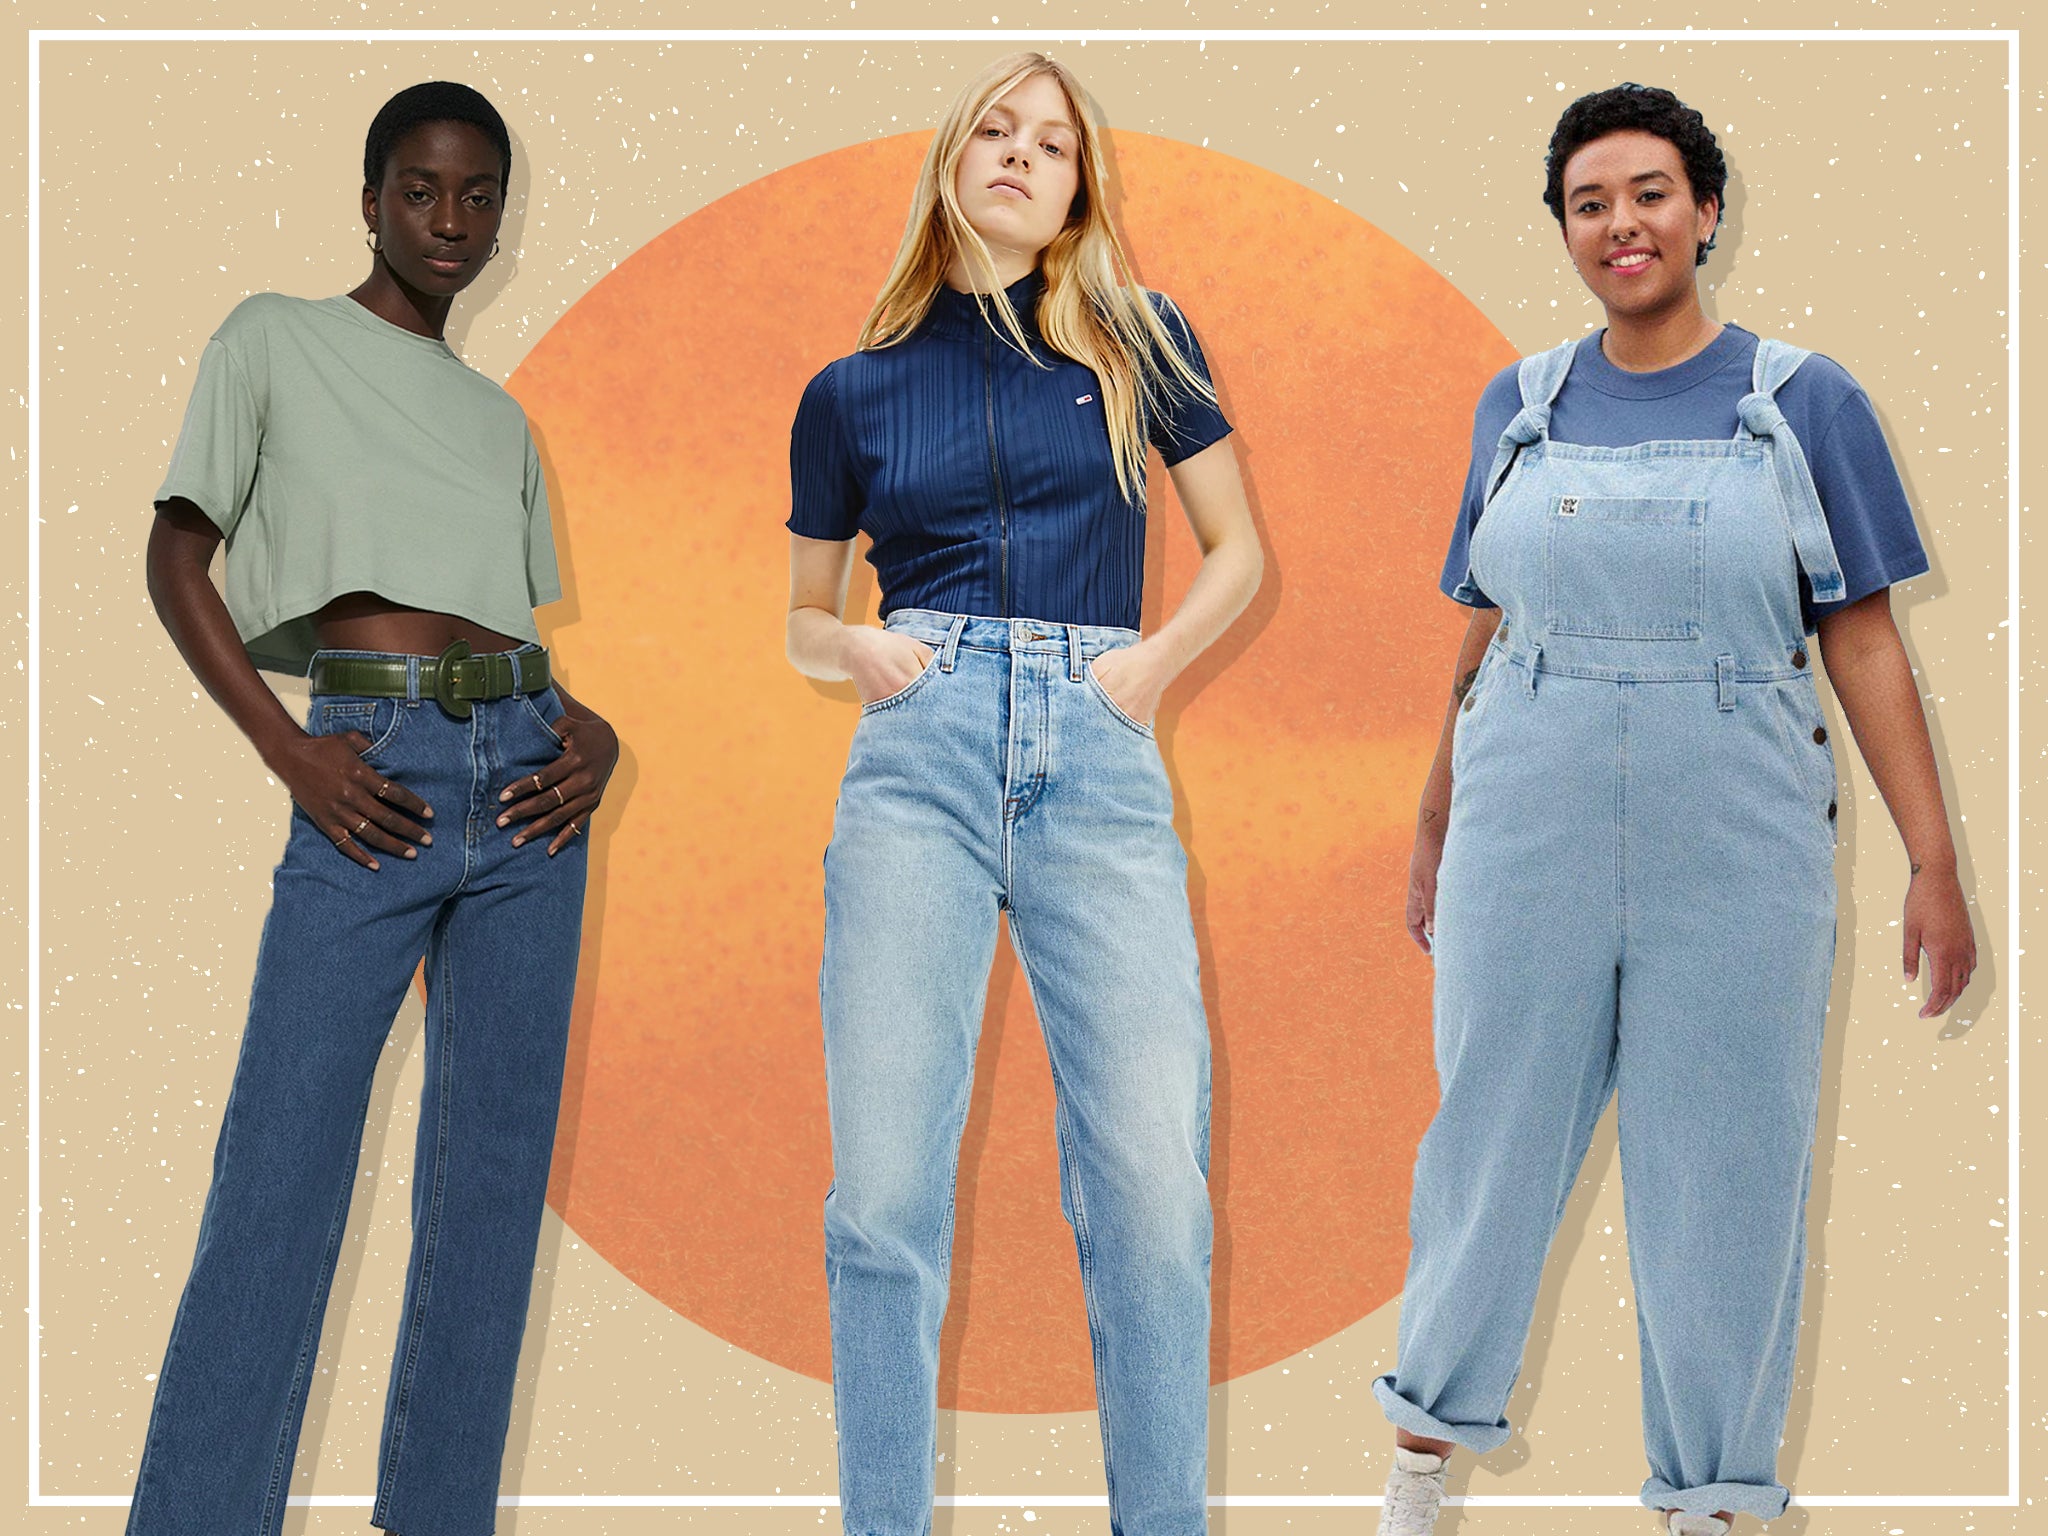 While there is a long way to go to make sure denim is less harmful, the good news is, we can make more eco-conscious decisions and invest in the right brands that are doing good